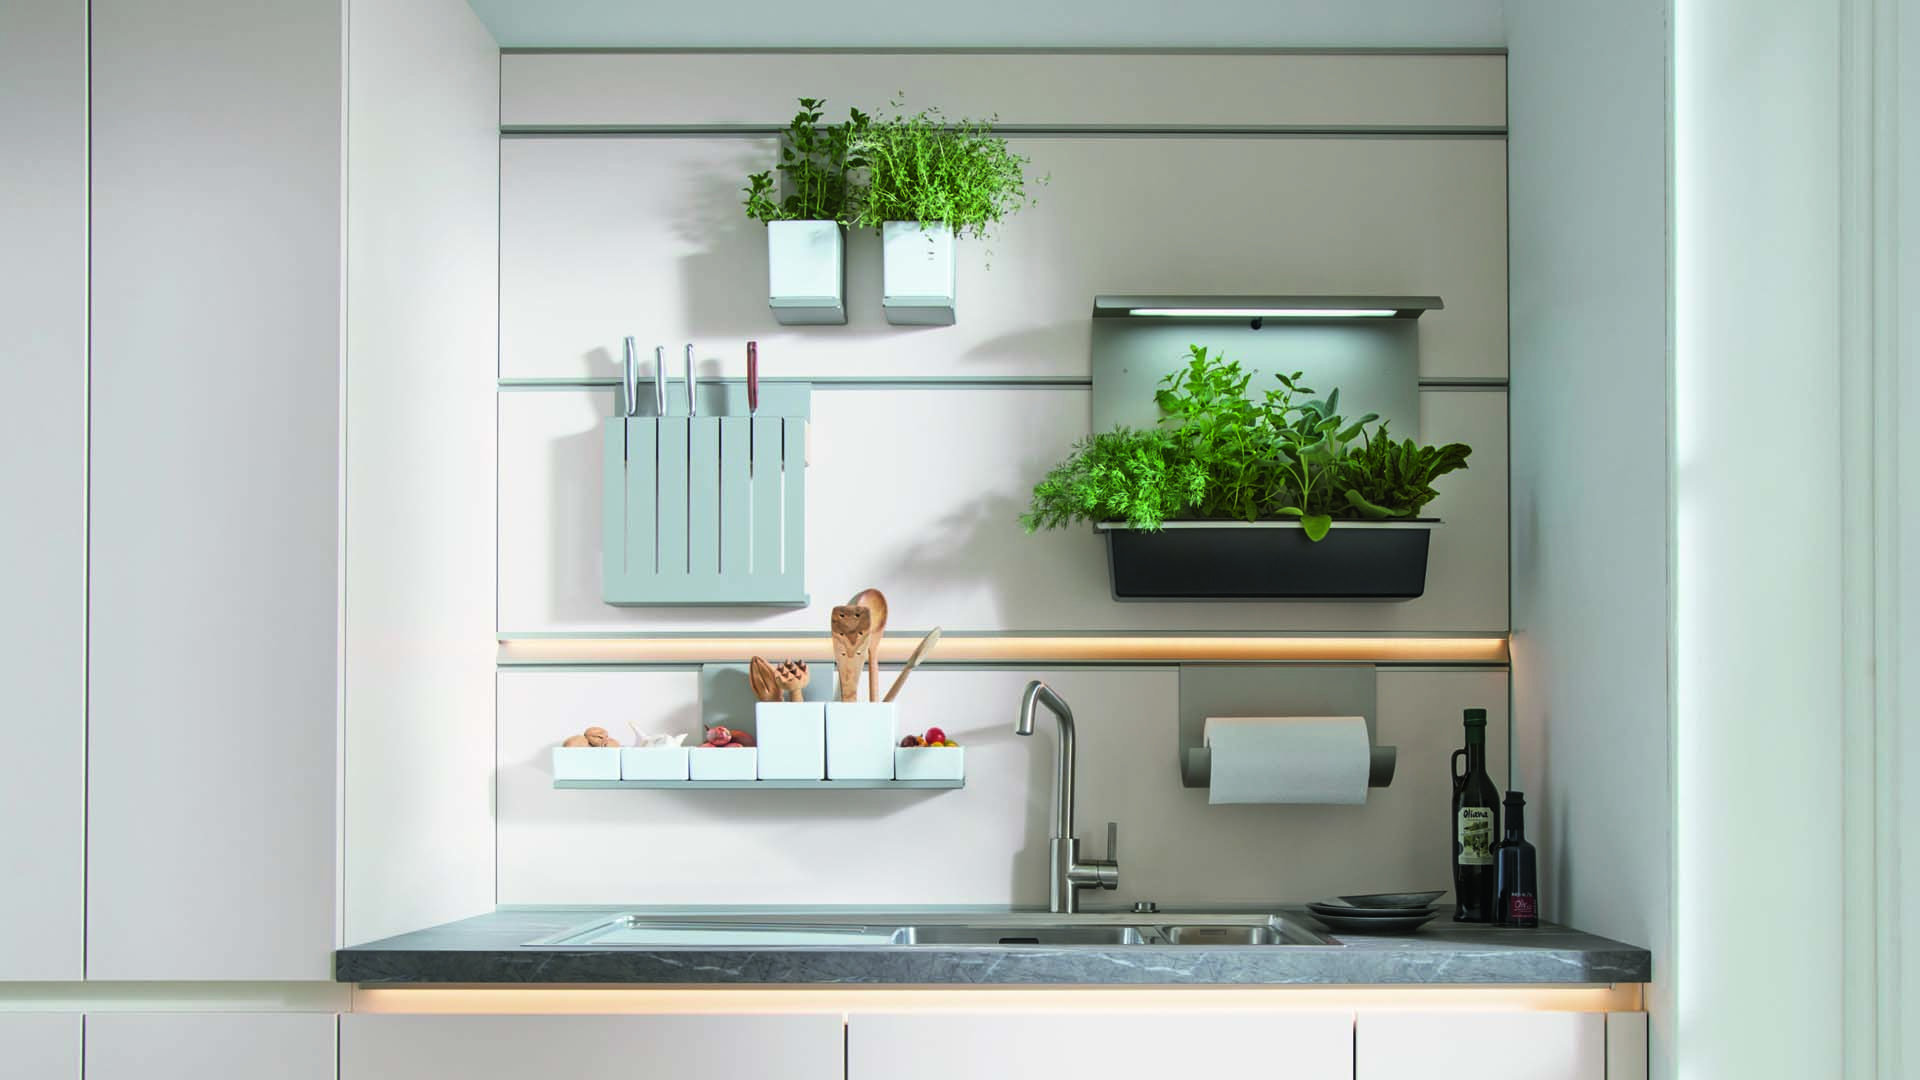 A kitchen sink area filled with plants on shelves